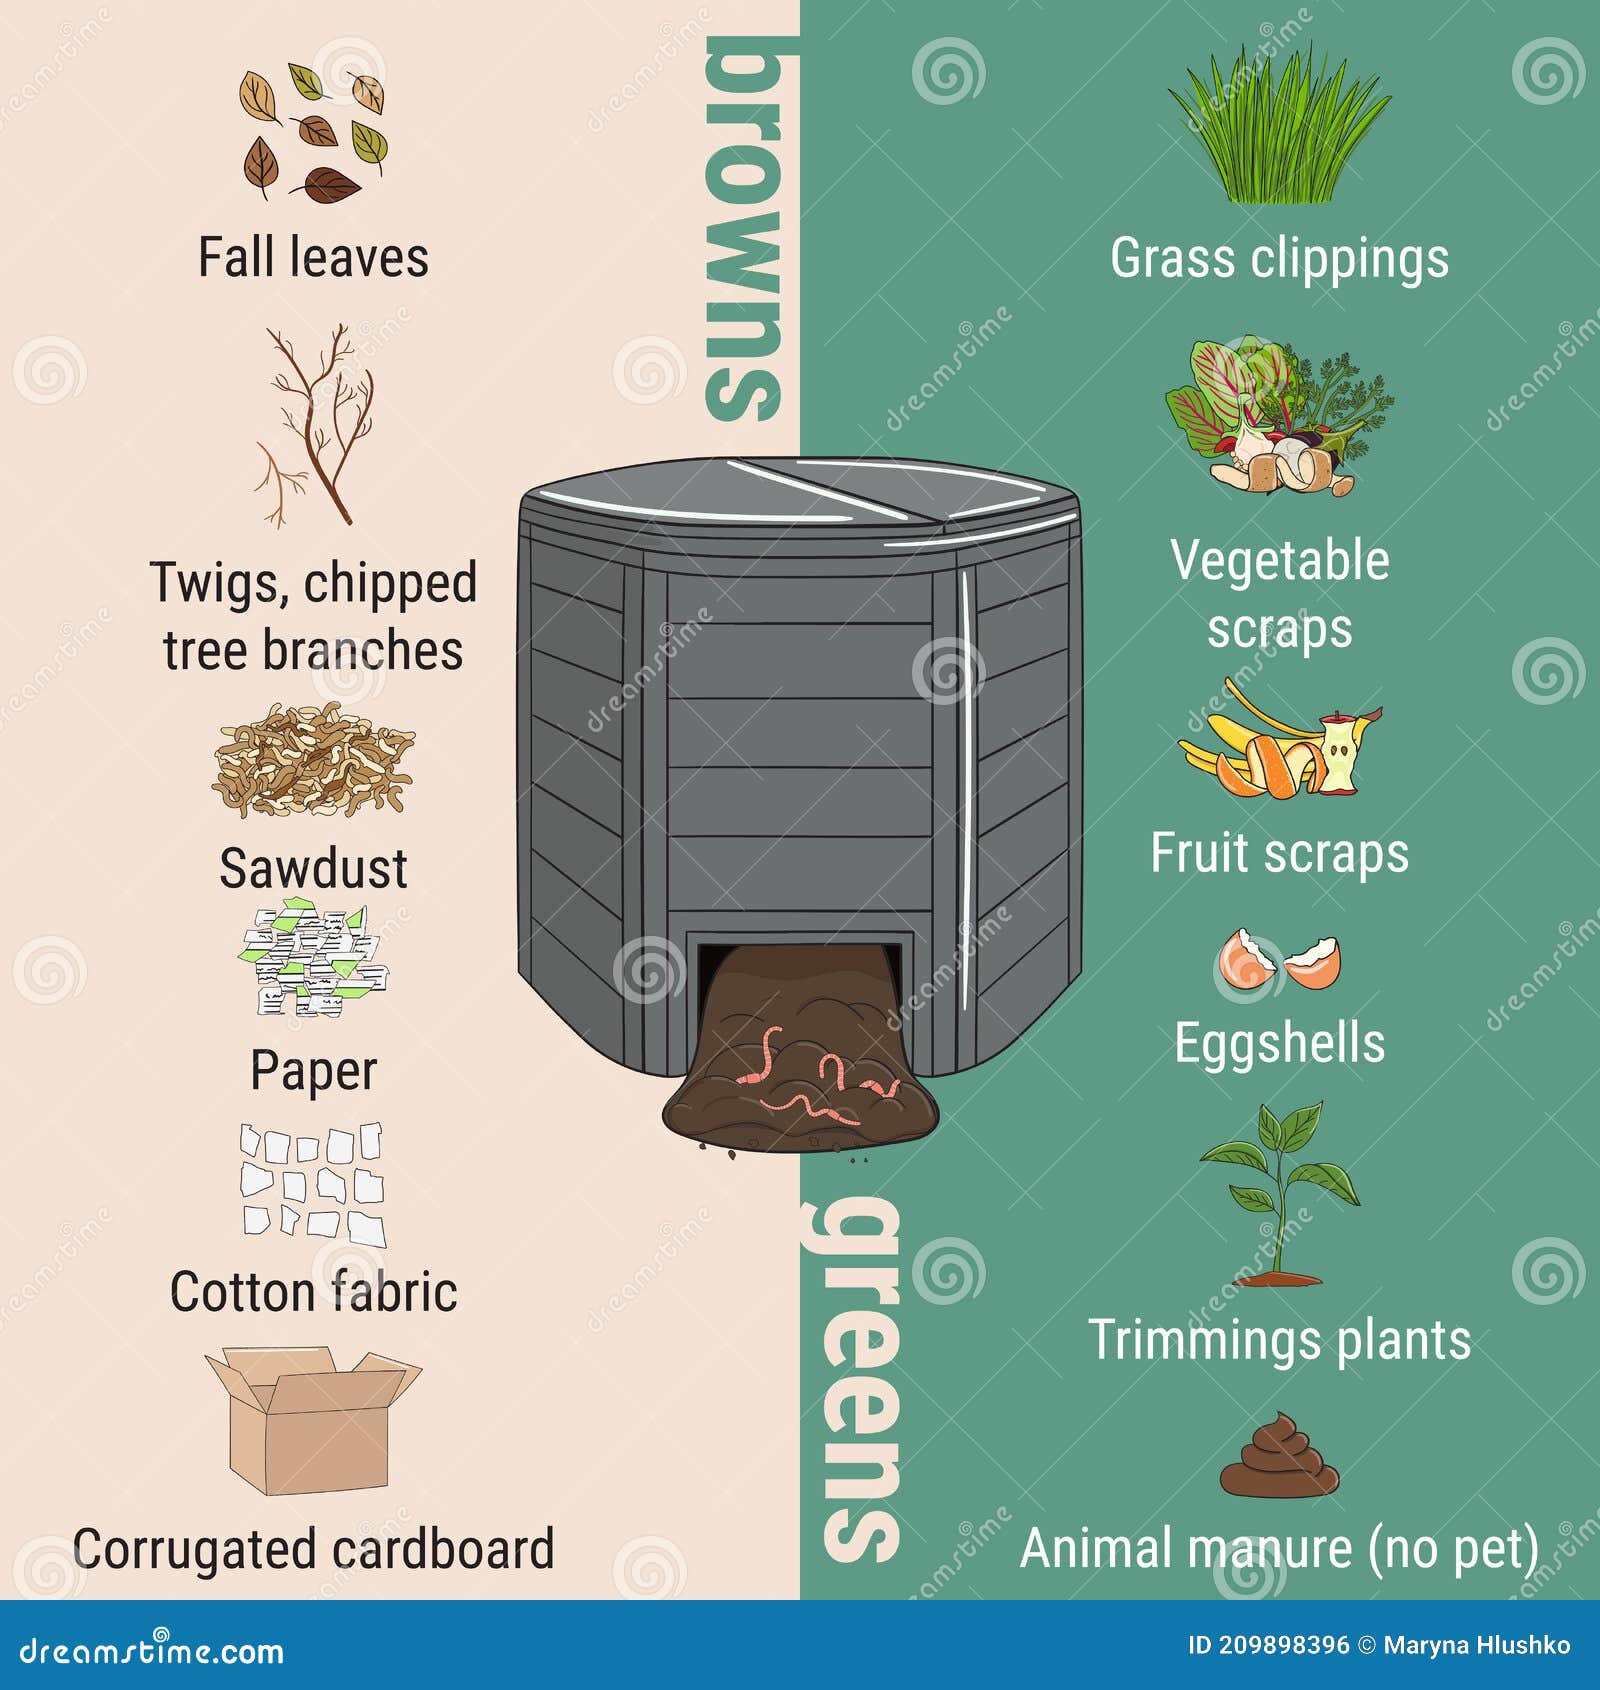 Infographic Of Garden Composting Bin With Scraps What To Compost Green And Brawn Ratio For Composting Recycling Organic Waste Stock Vector Illustration Of Environment Ground 996